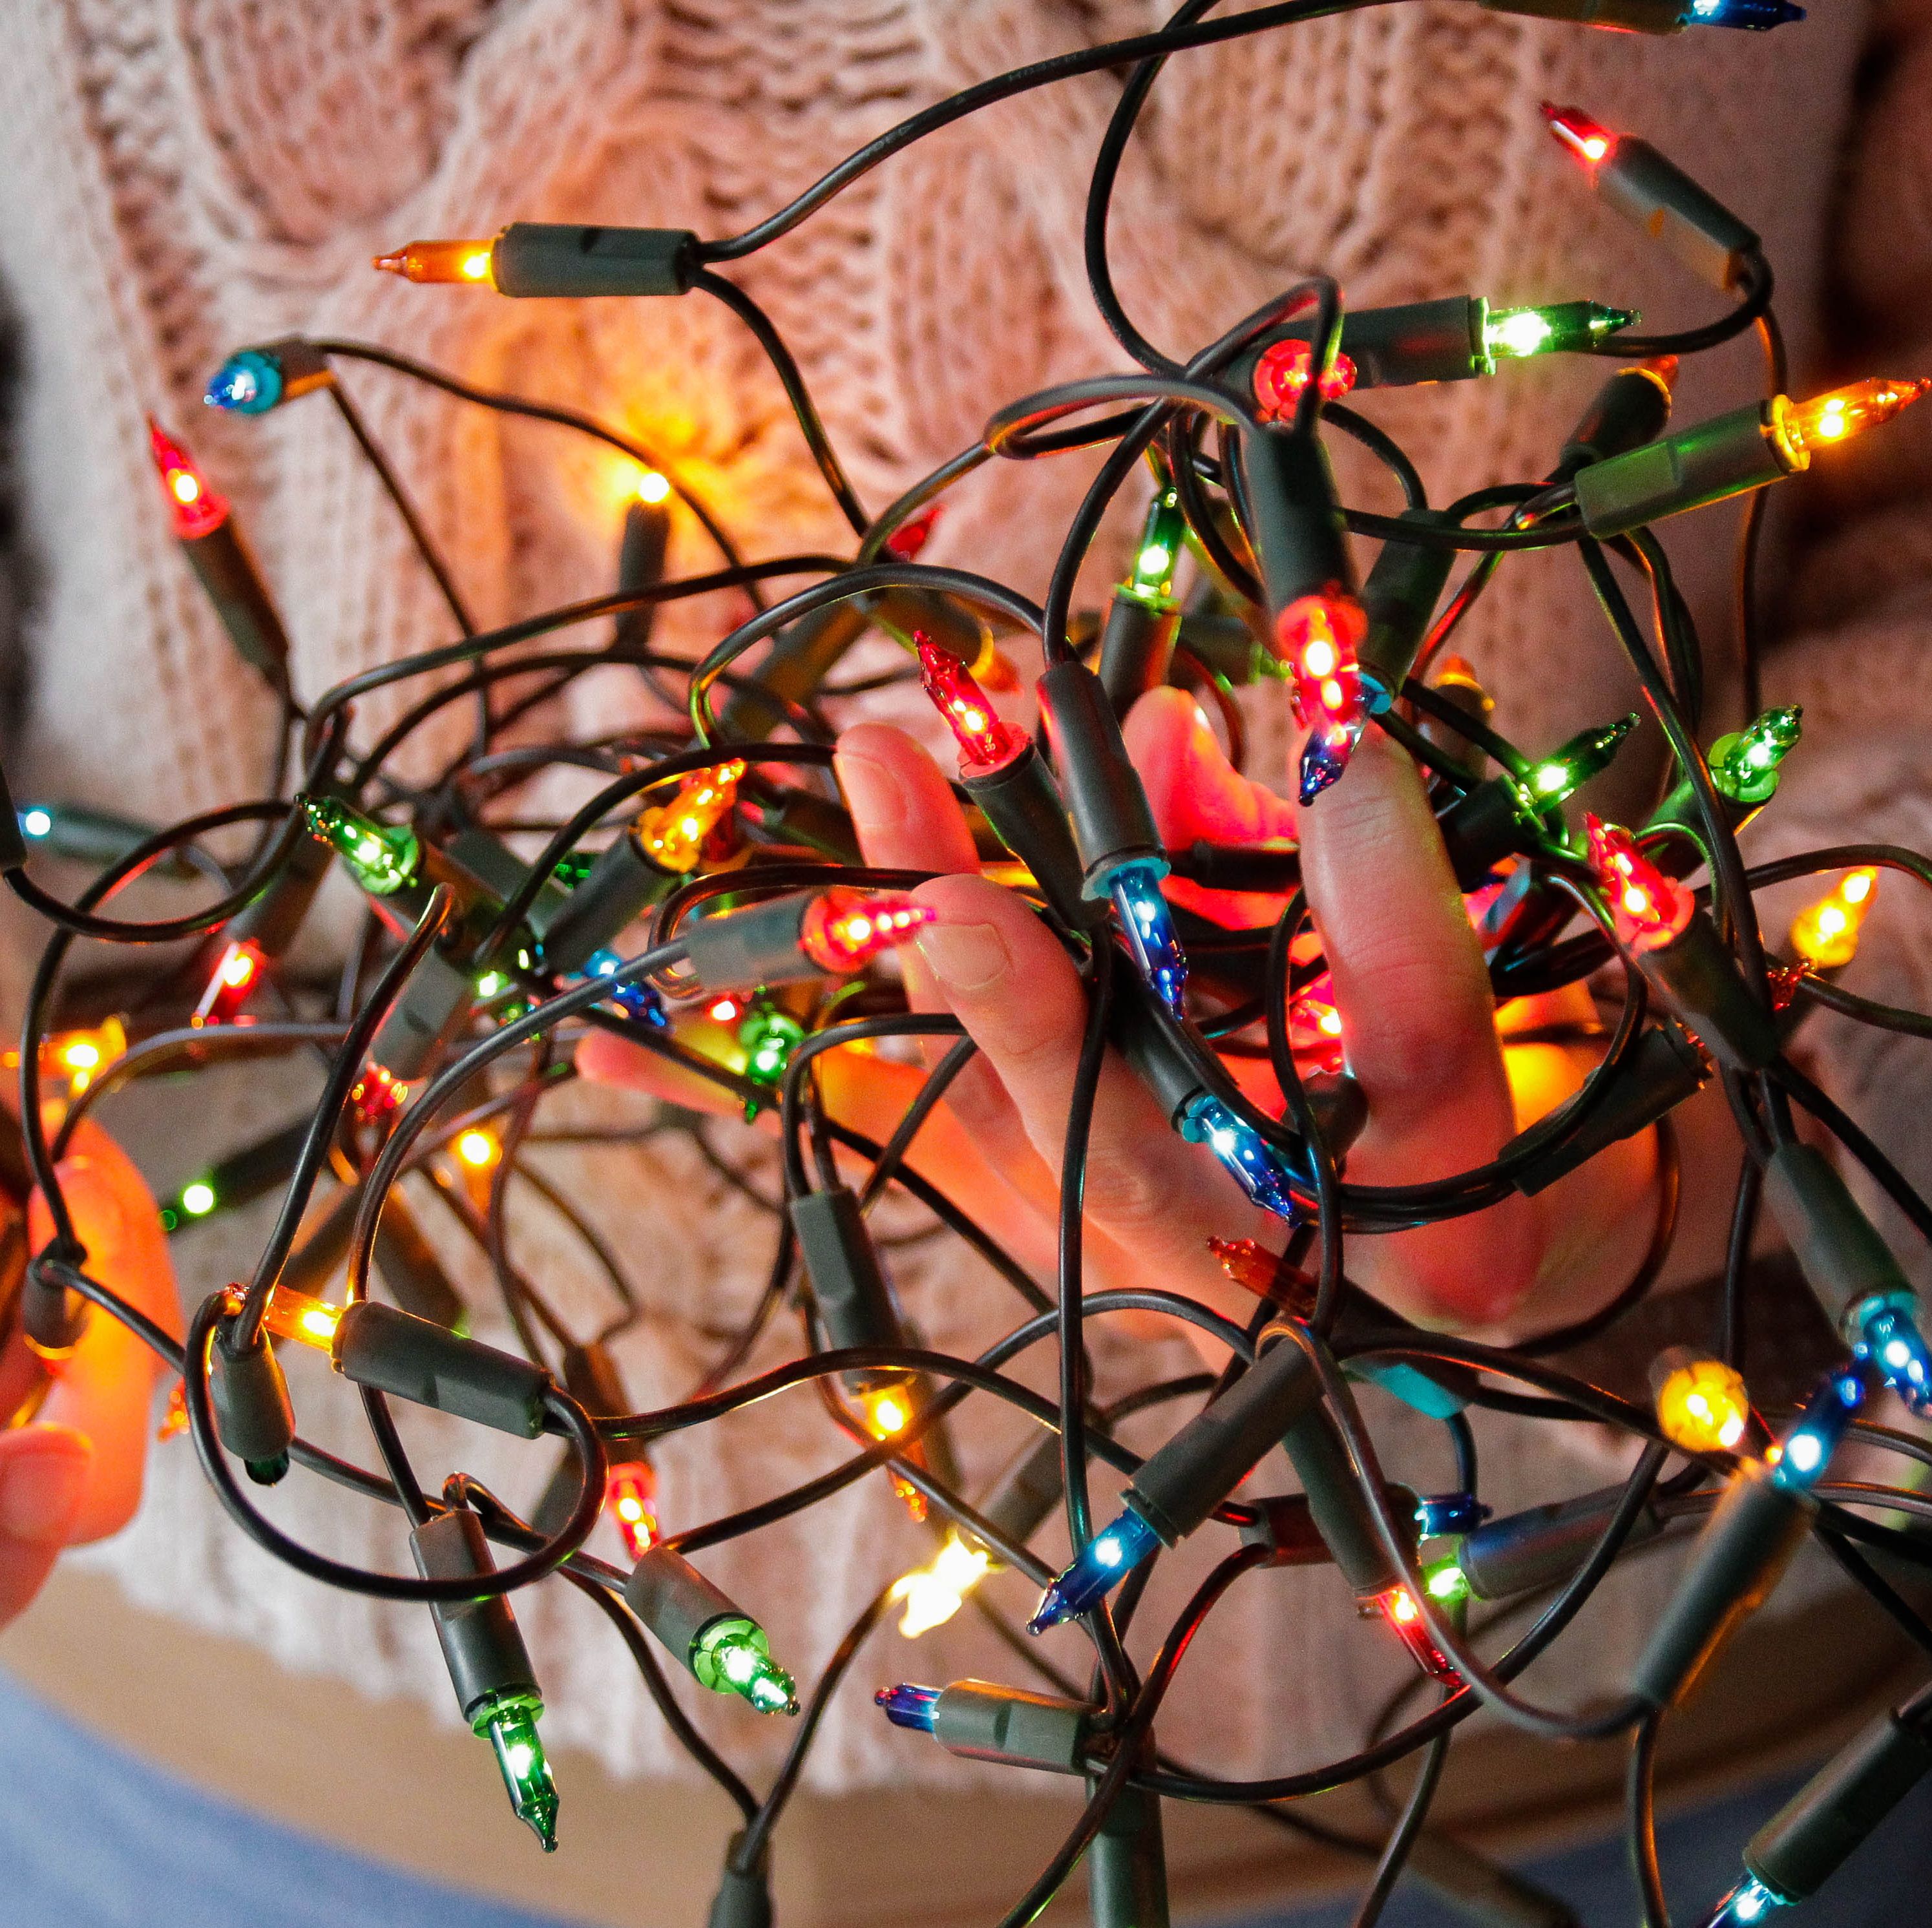 Pulling Back the Curtains on How Your Christmas Lights Work